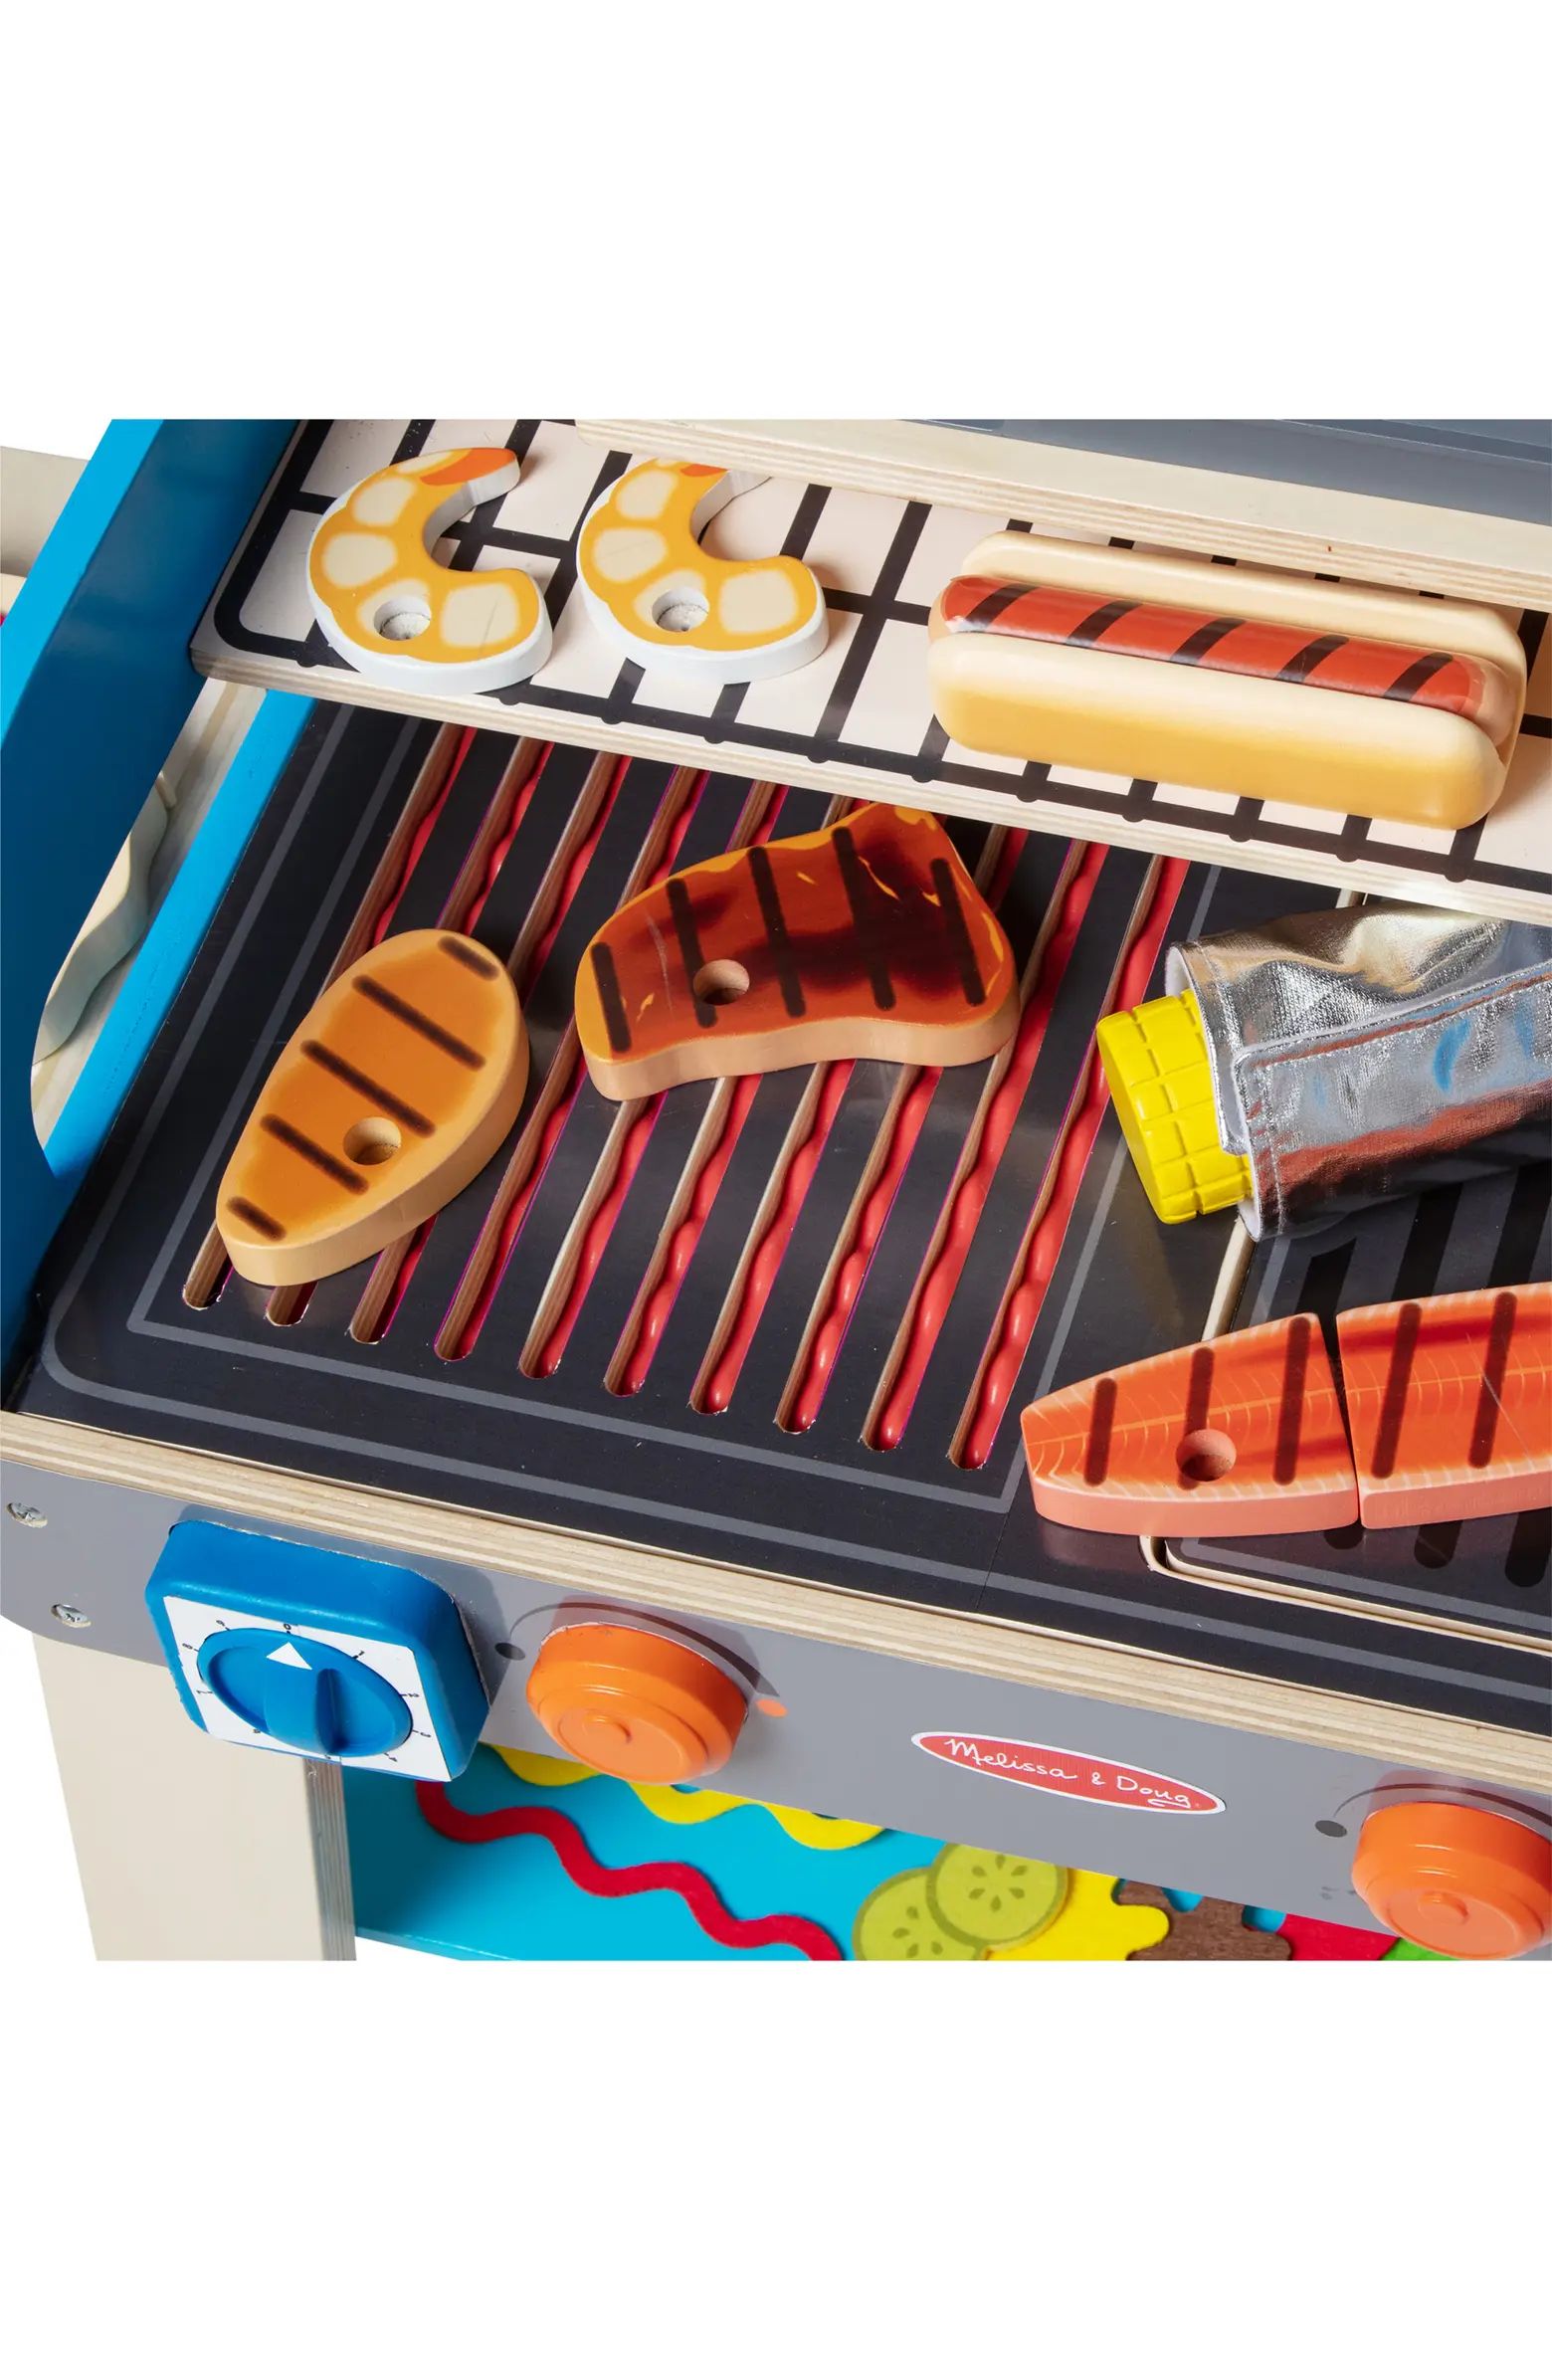 Deluxe Grill & Pizza Oven Playset | Nordstrom